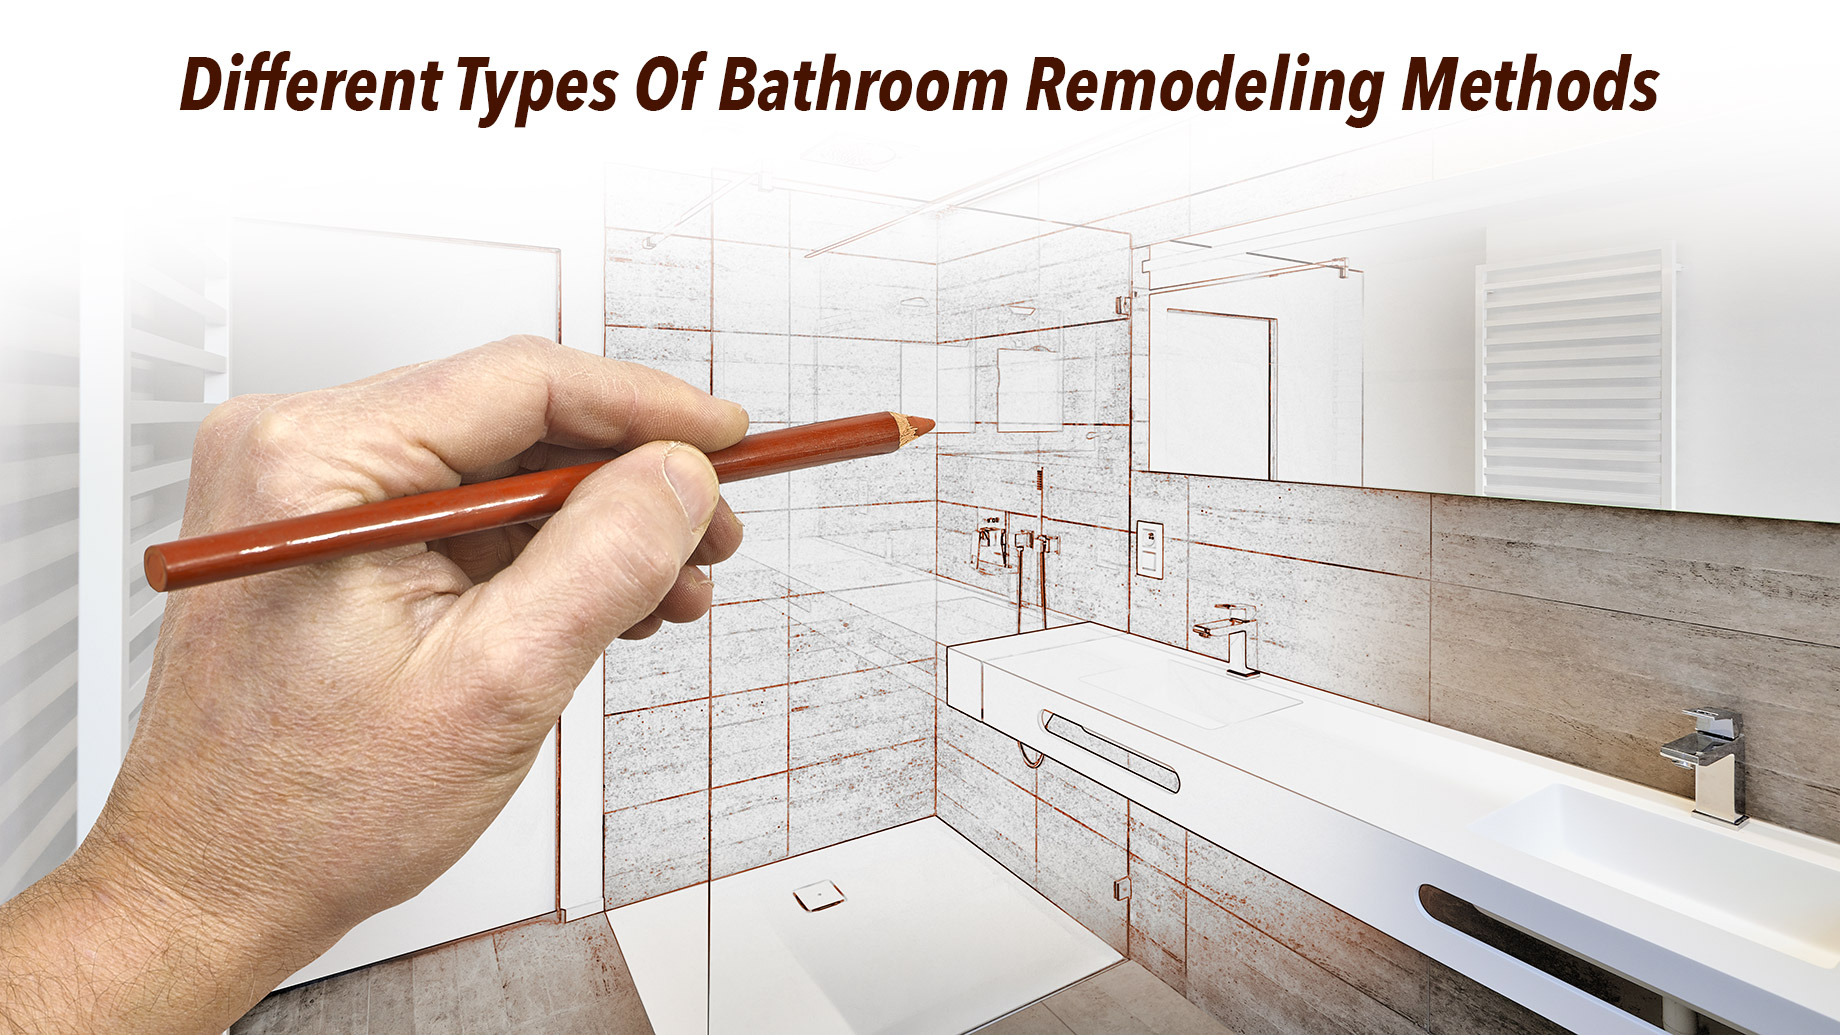 Different Types Of Bathroom Remodeling Methods